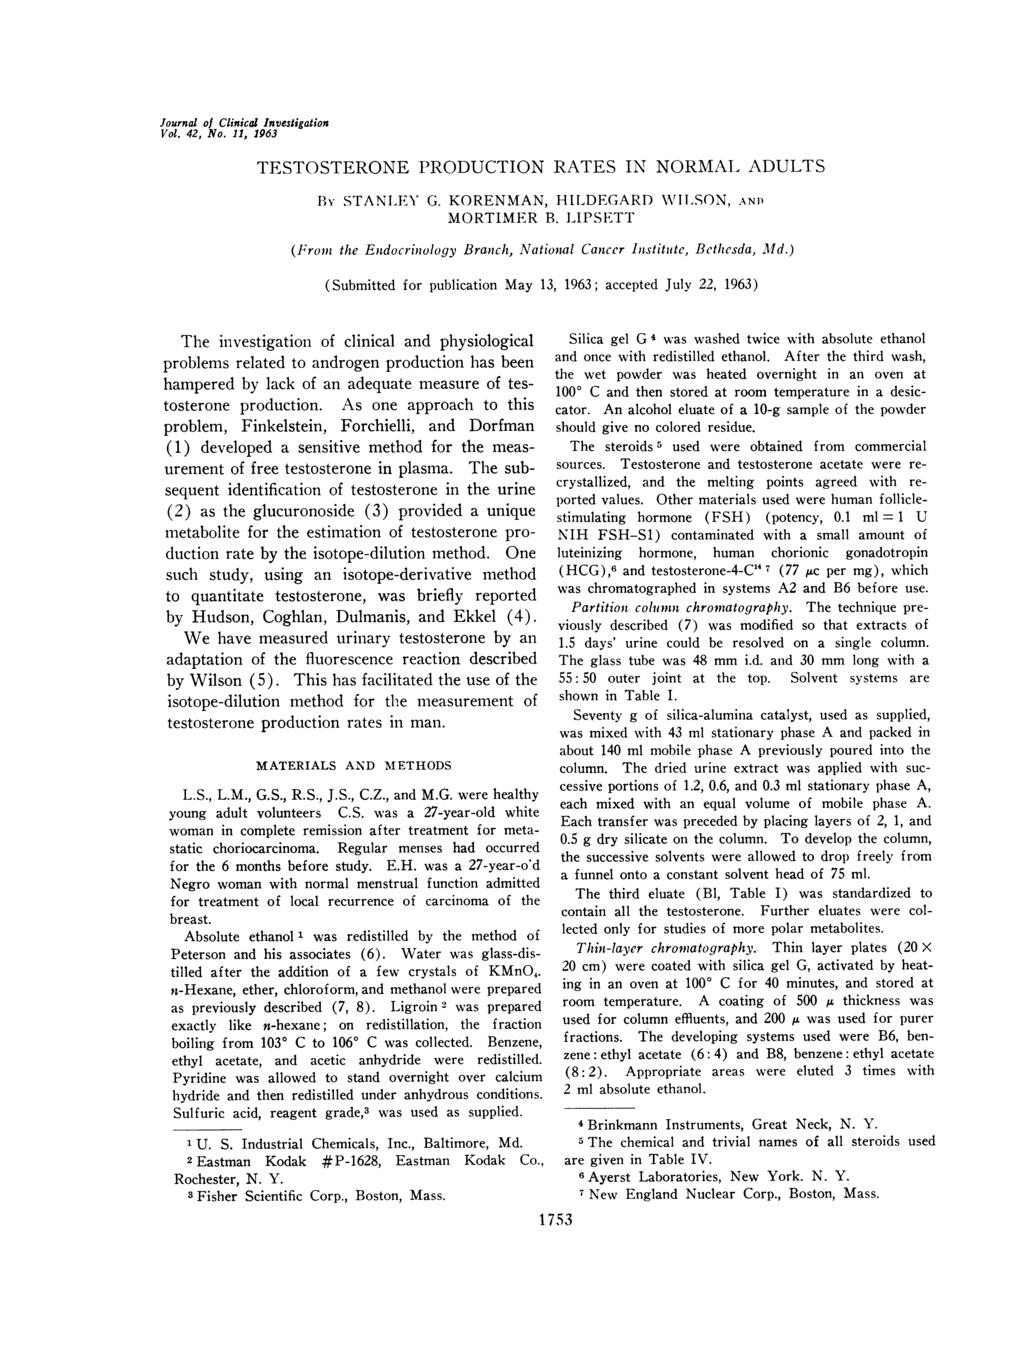 Journal of Clinical Investigation Vol. 42, No. 11, 1963 TESTOSTERONE PRODUCTION RATES IN NORMAL ADULTS BY STANLEaY G. KORENMAN, HILDEGARD WILSON, AND MORTIMER B.